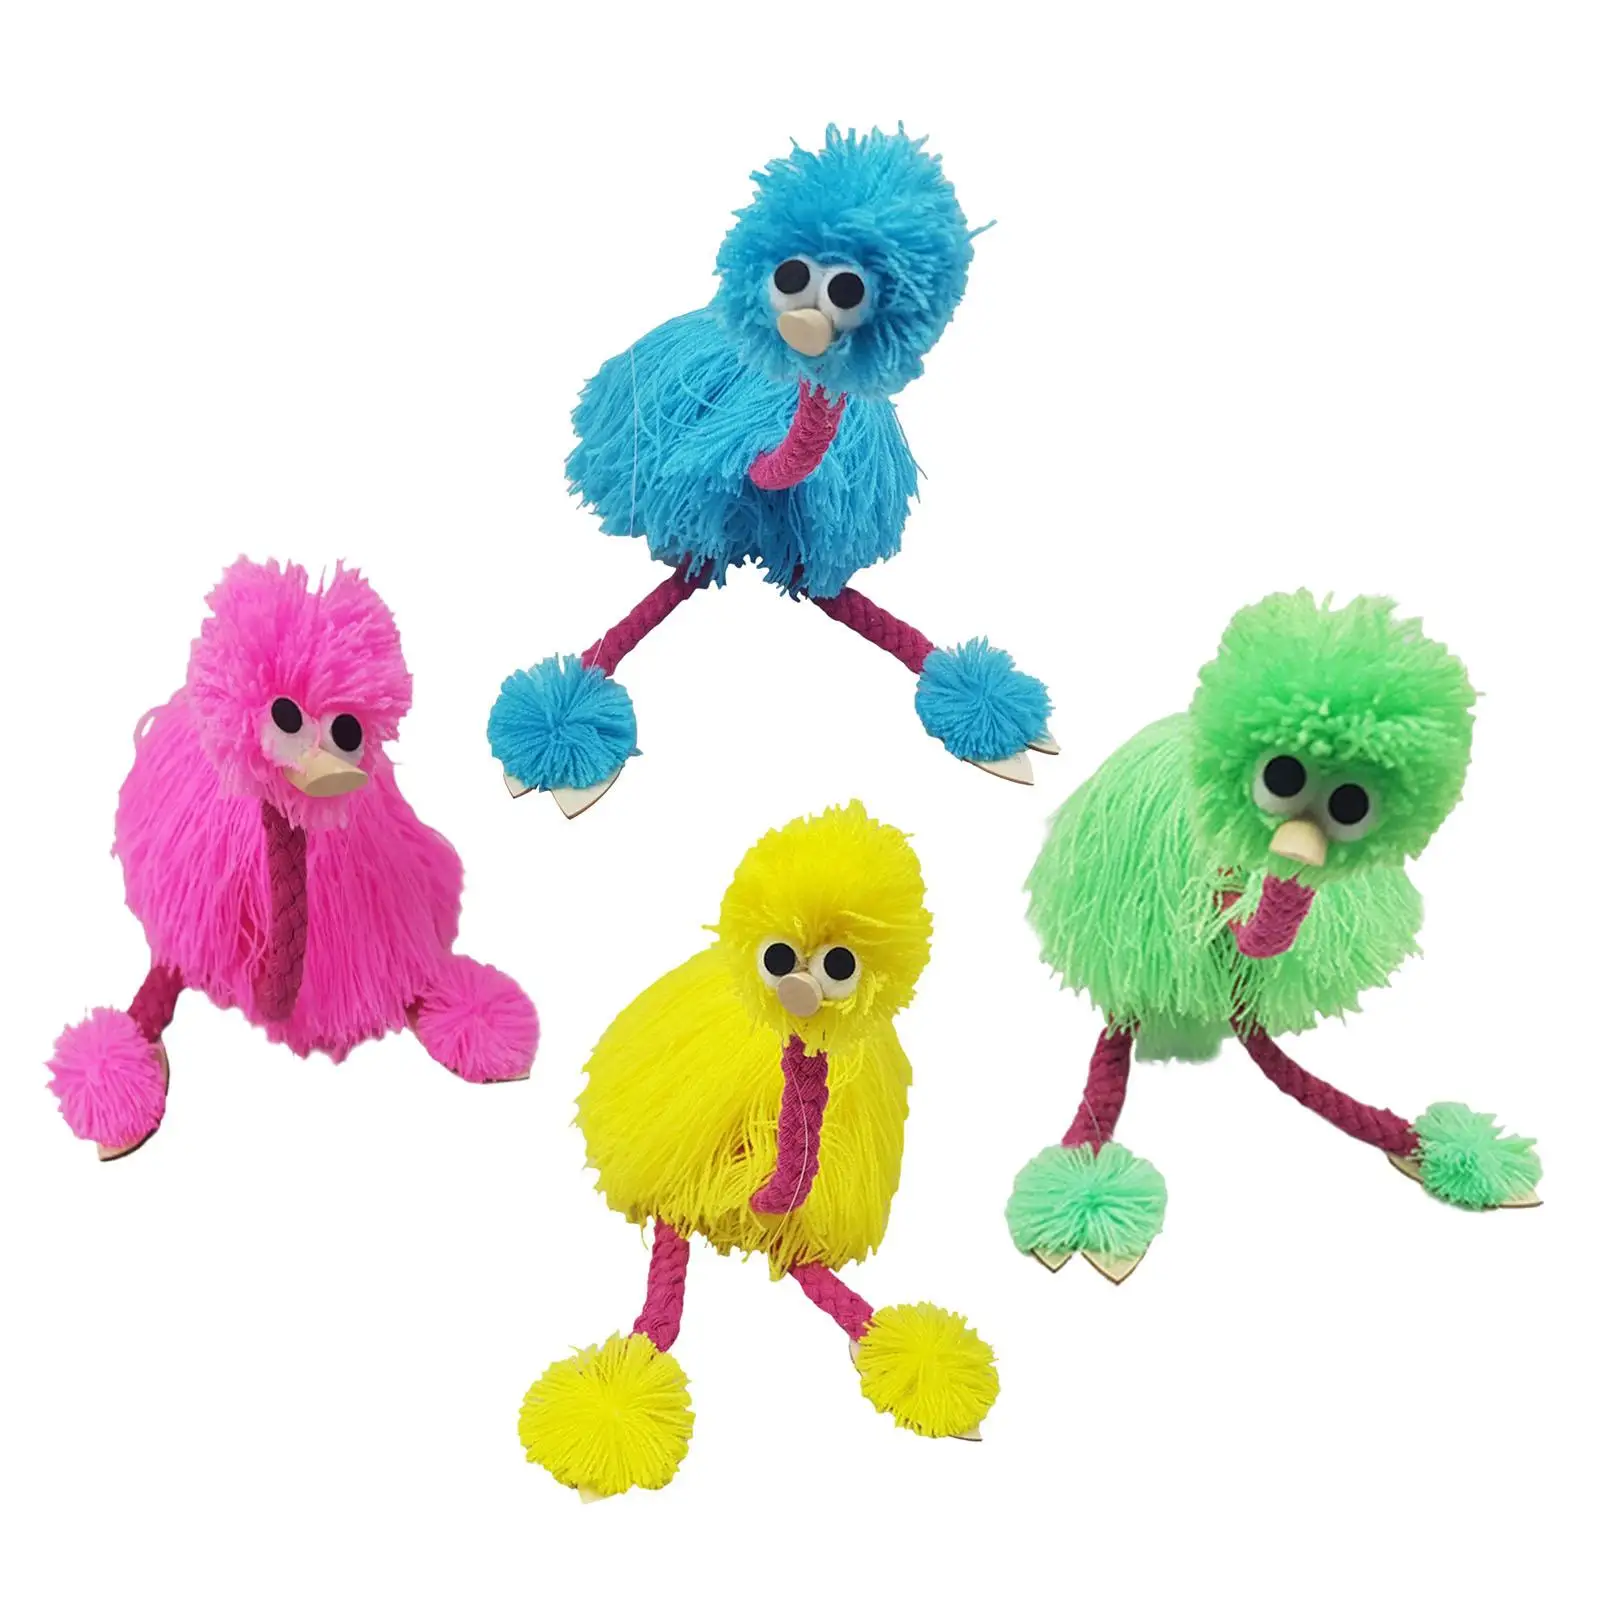 Cute Marionettes String Puppet Lovely Bird Animal Toy for Kids Gift ages 3 Years Old Stage Performance Party Toy Holiday